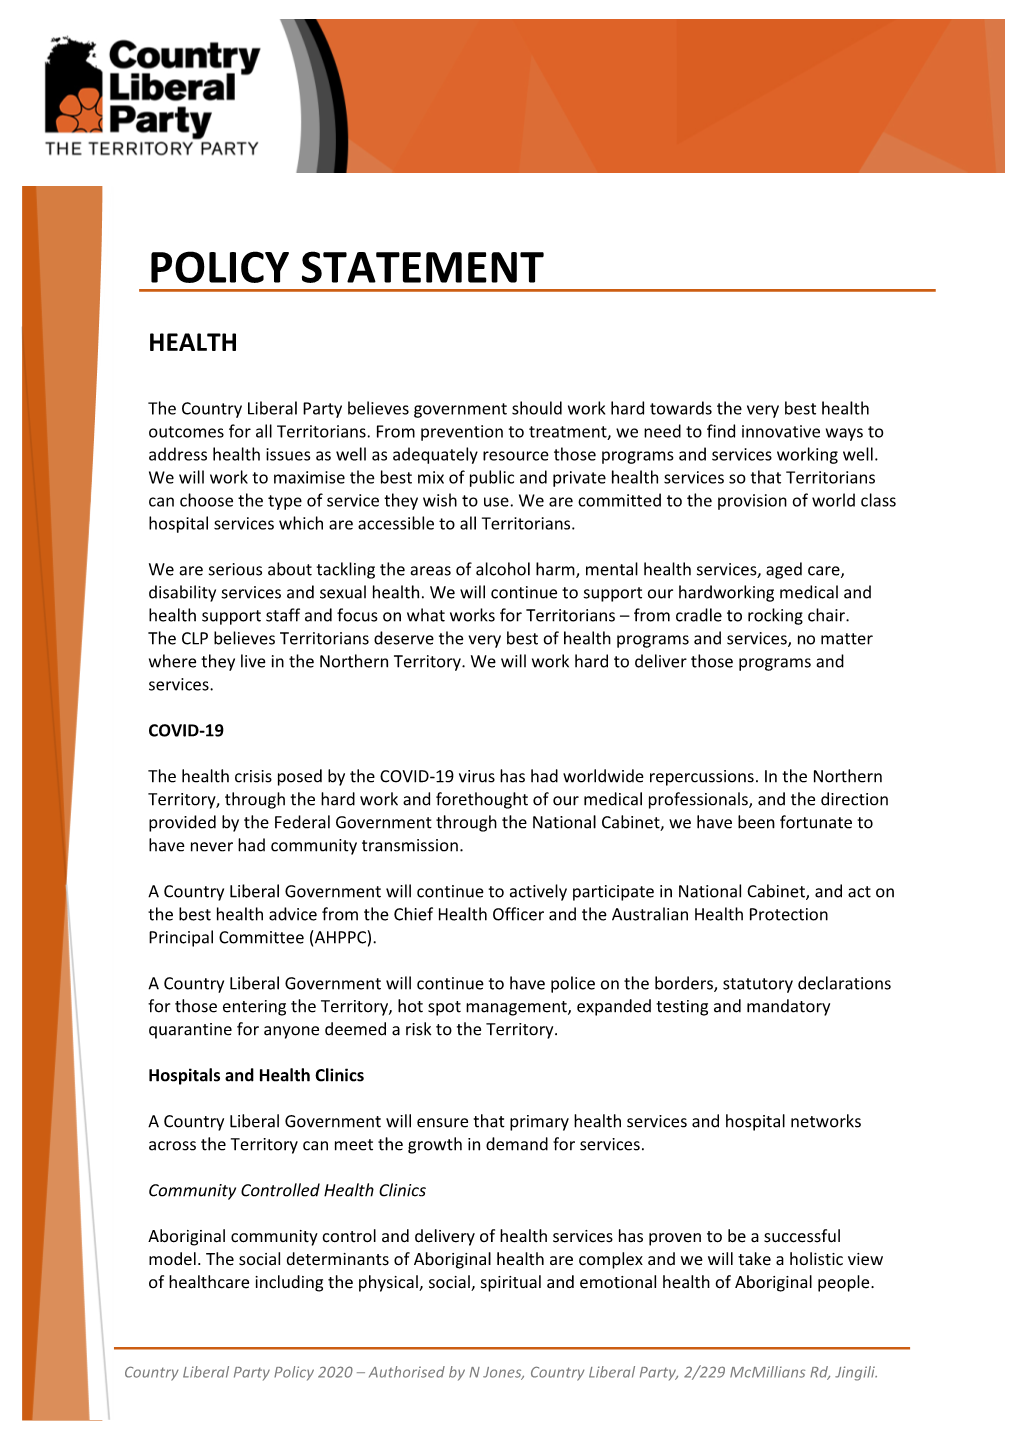 Policy Statement